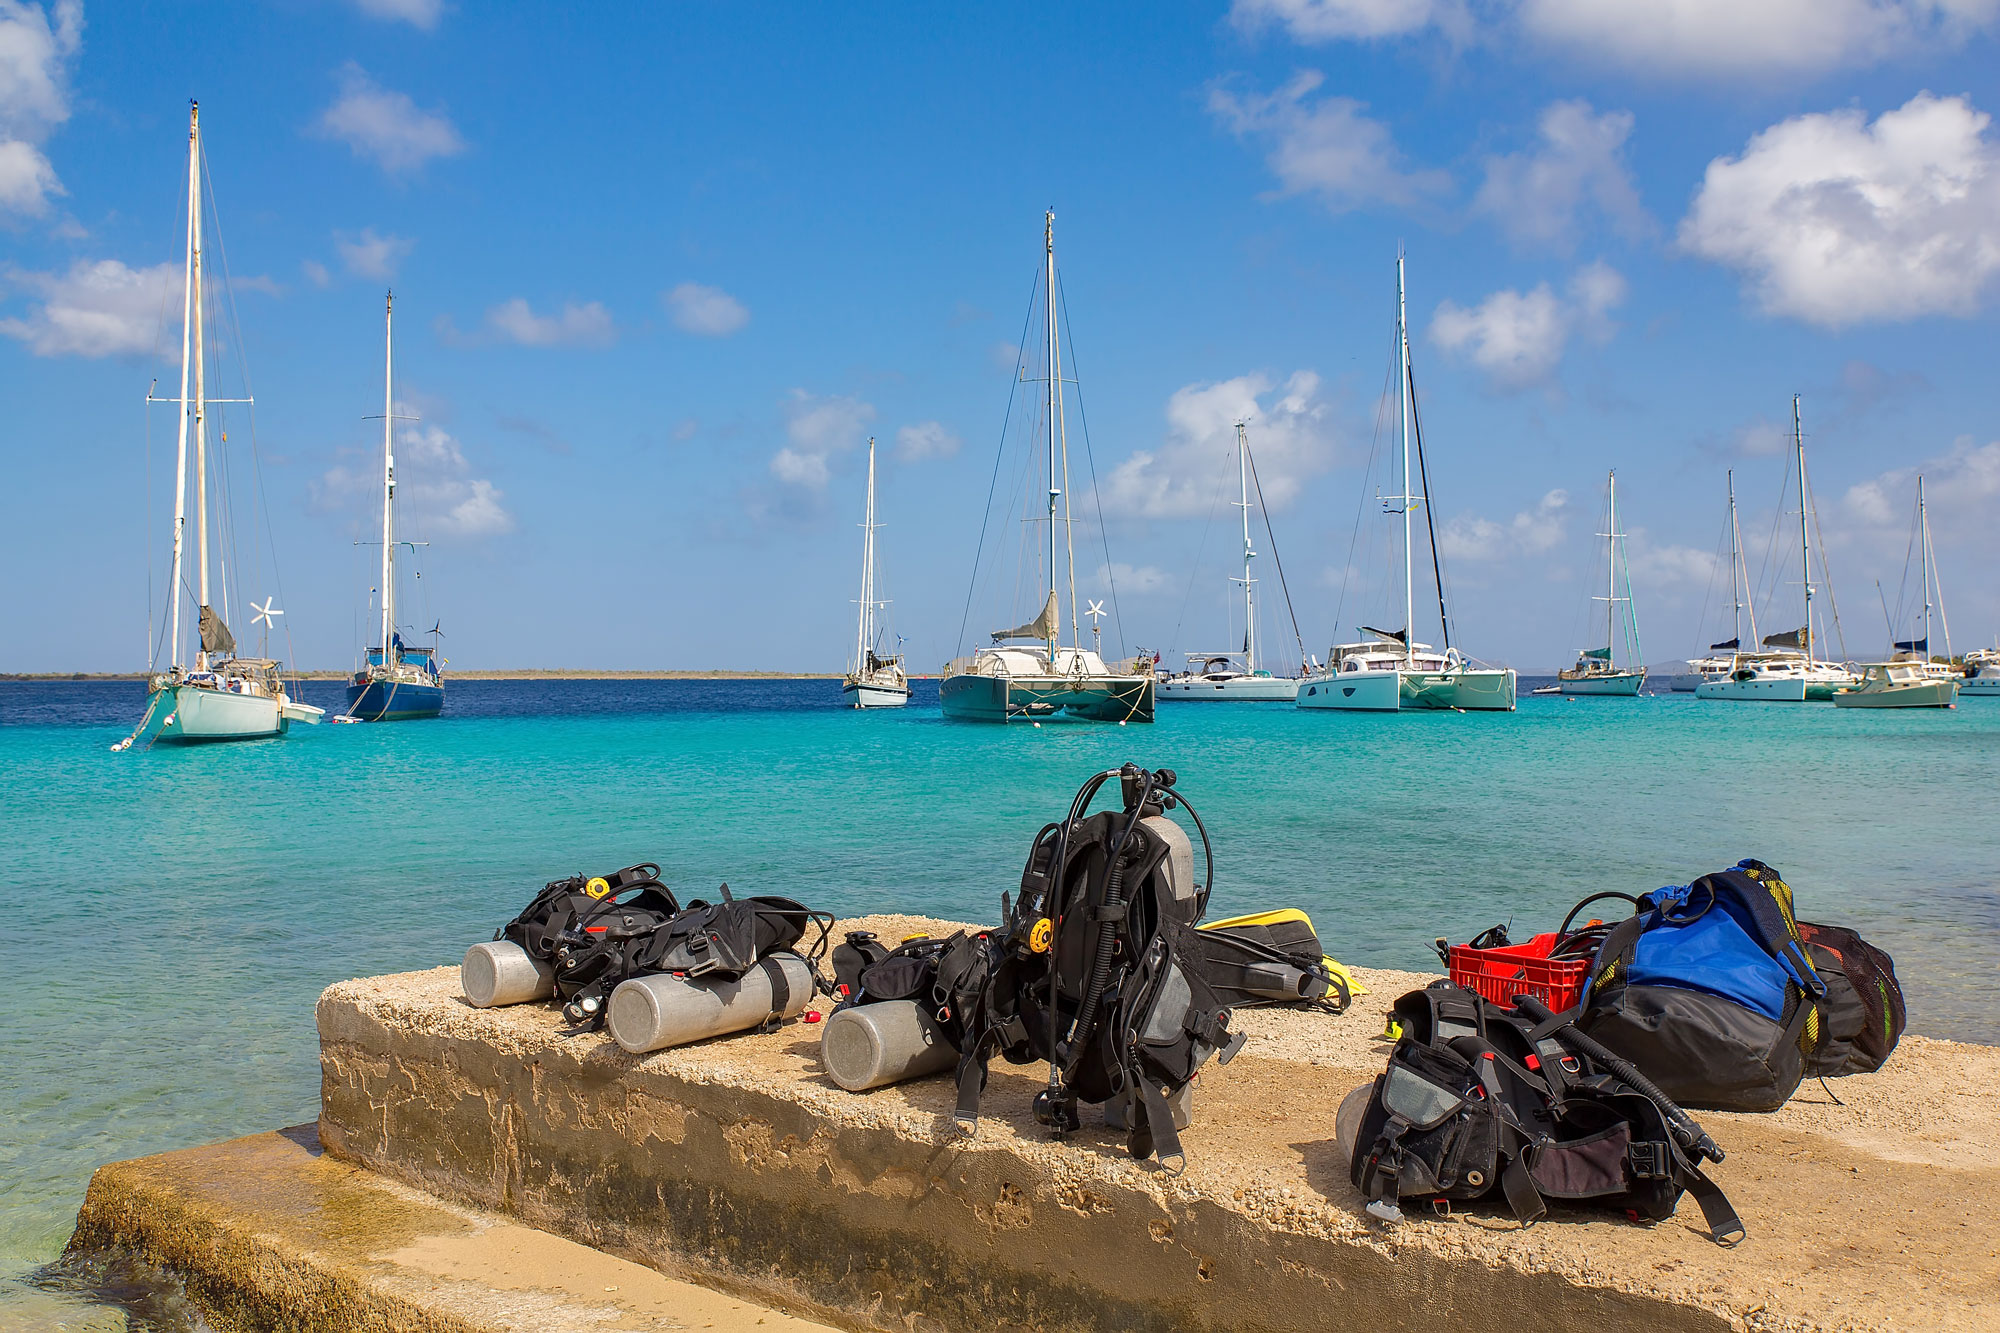 Scuba tanks on a pier with sailboats in the water in the background.